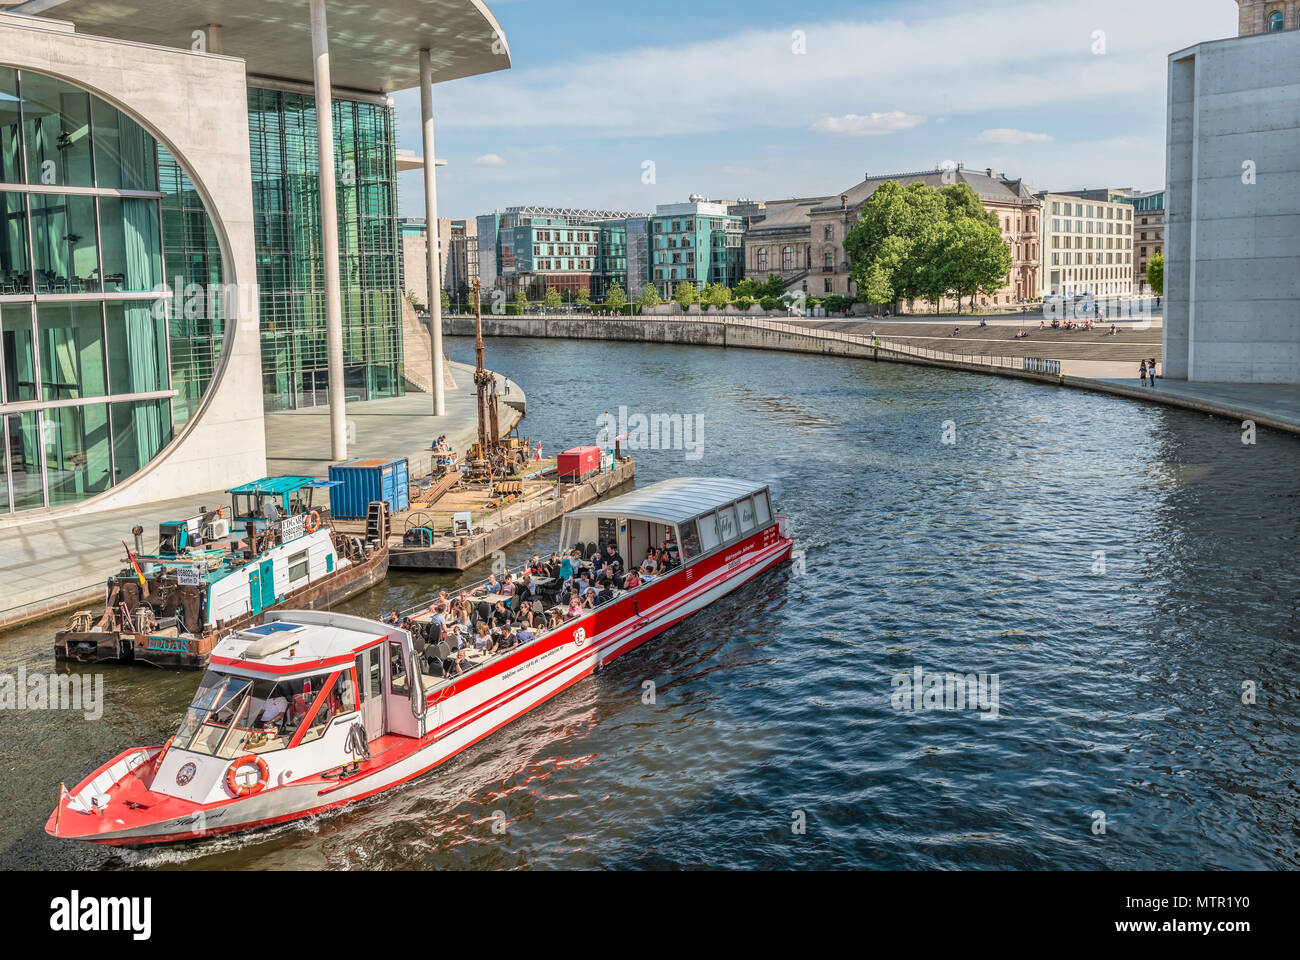 Sightseeing ship in front of the government quarter of Berlin, Germany Stock Photo